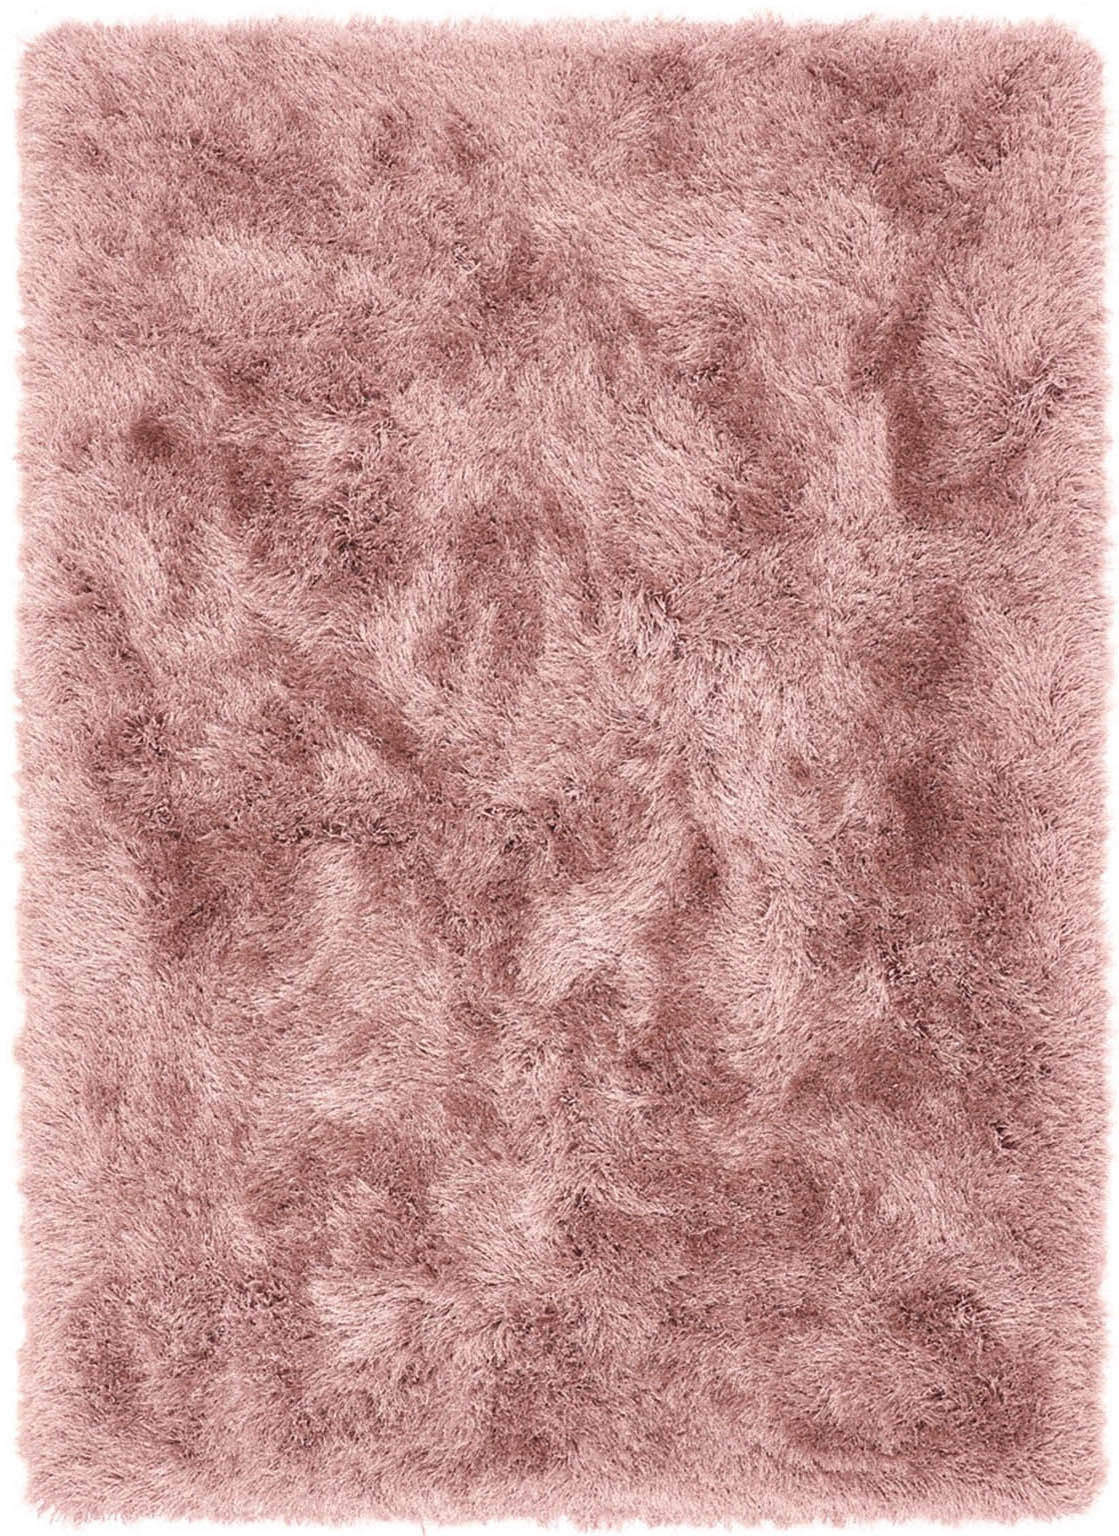 Pink Shaggy Rugs